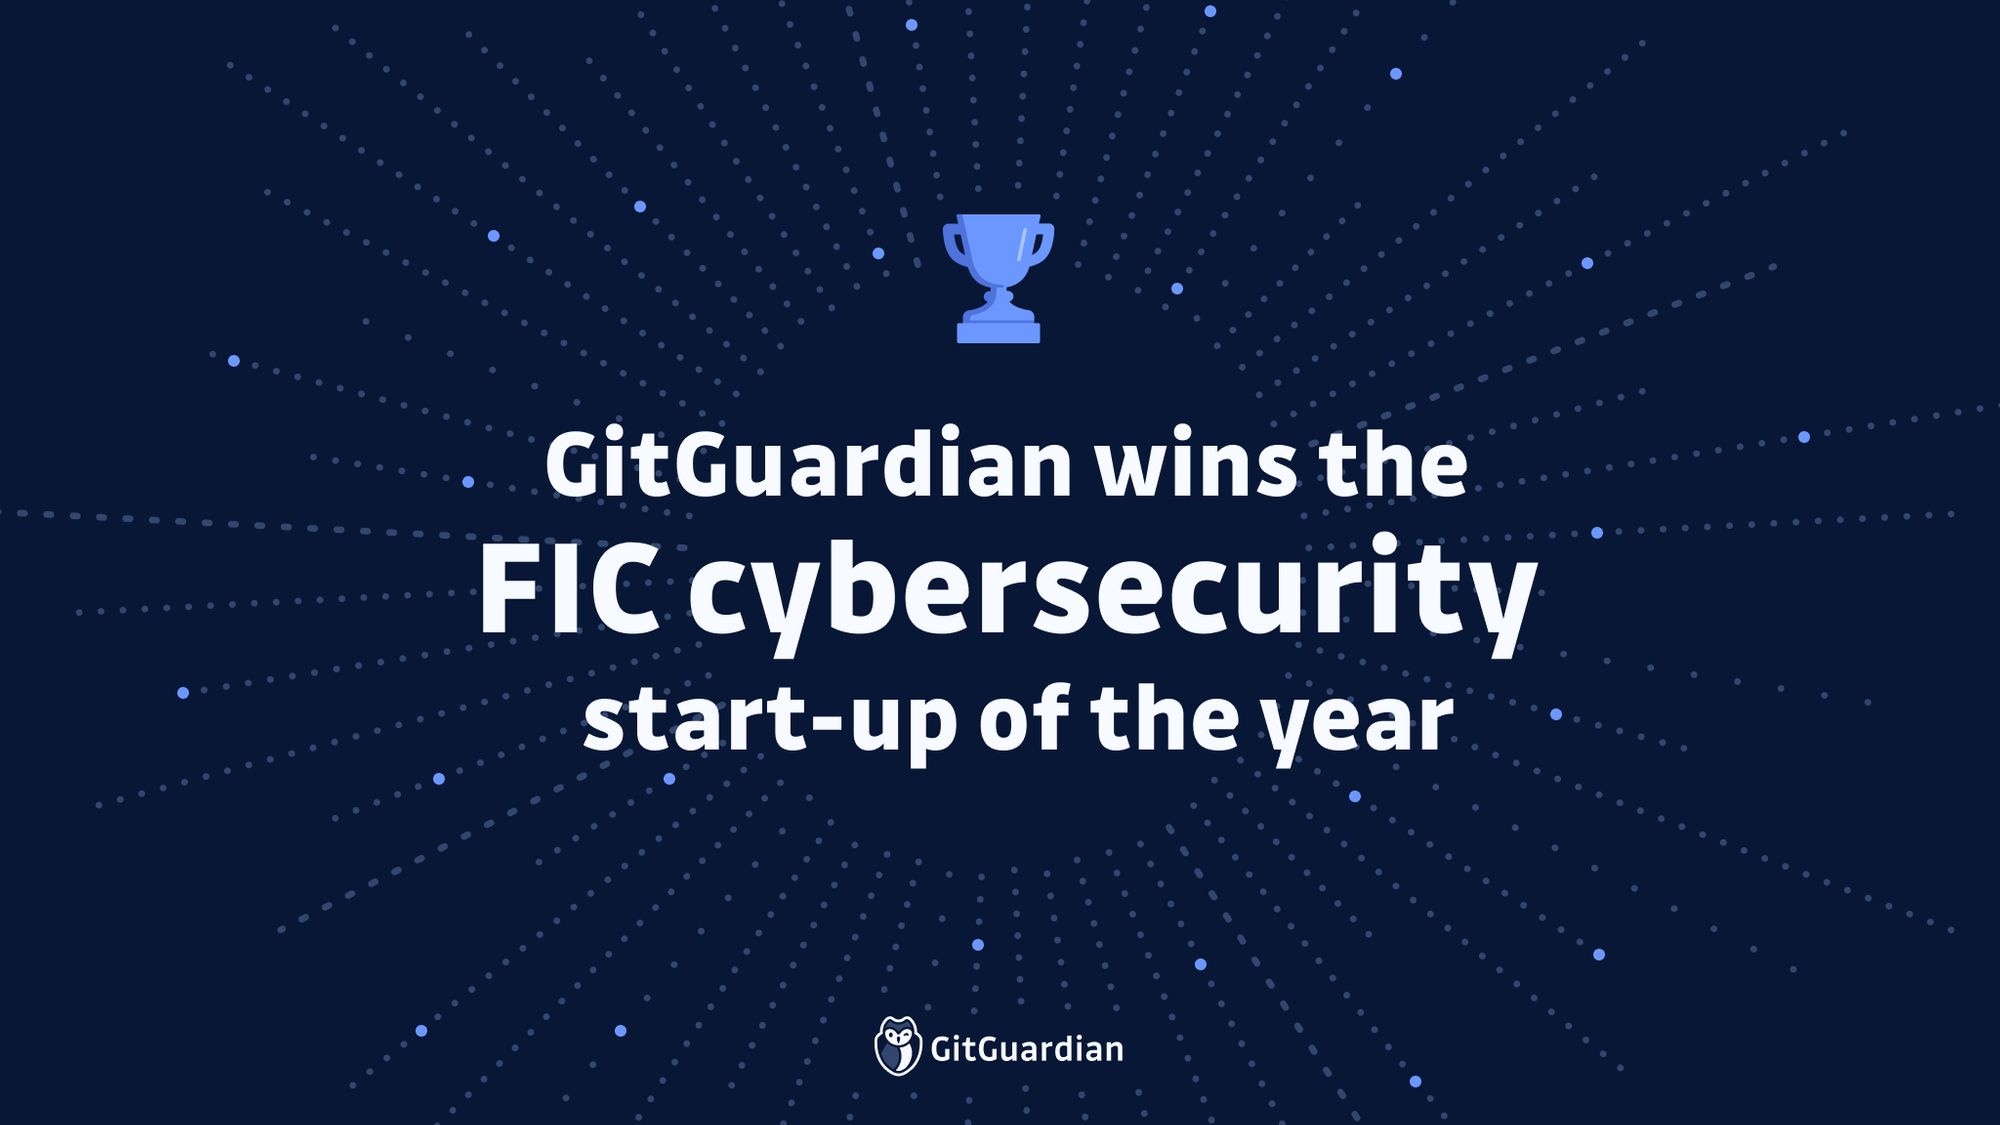 GitGuardian receives FIC cybersecurity start-up of the year award